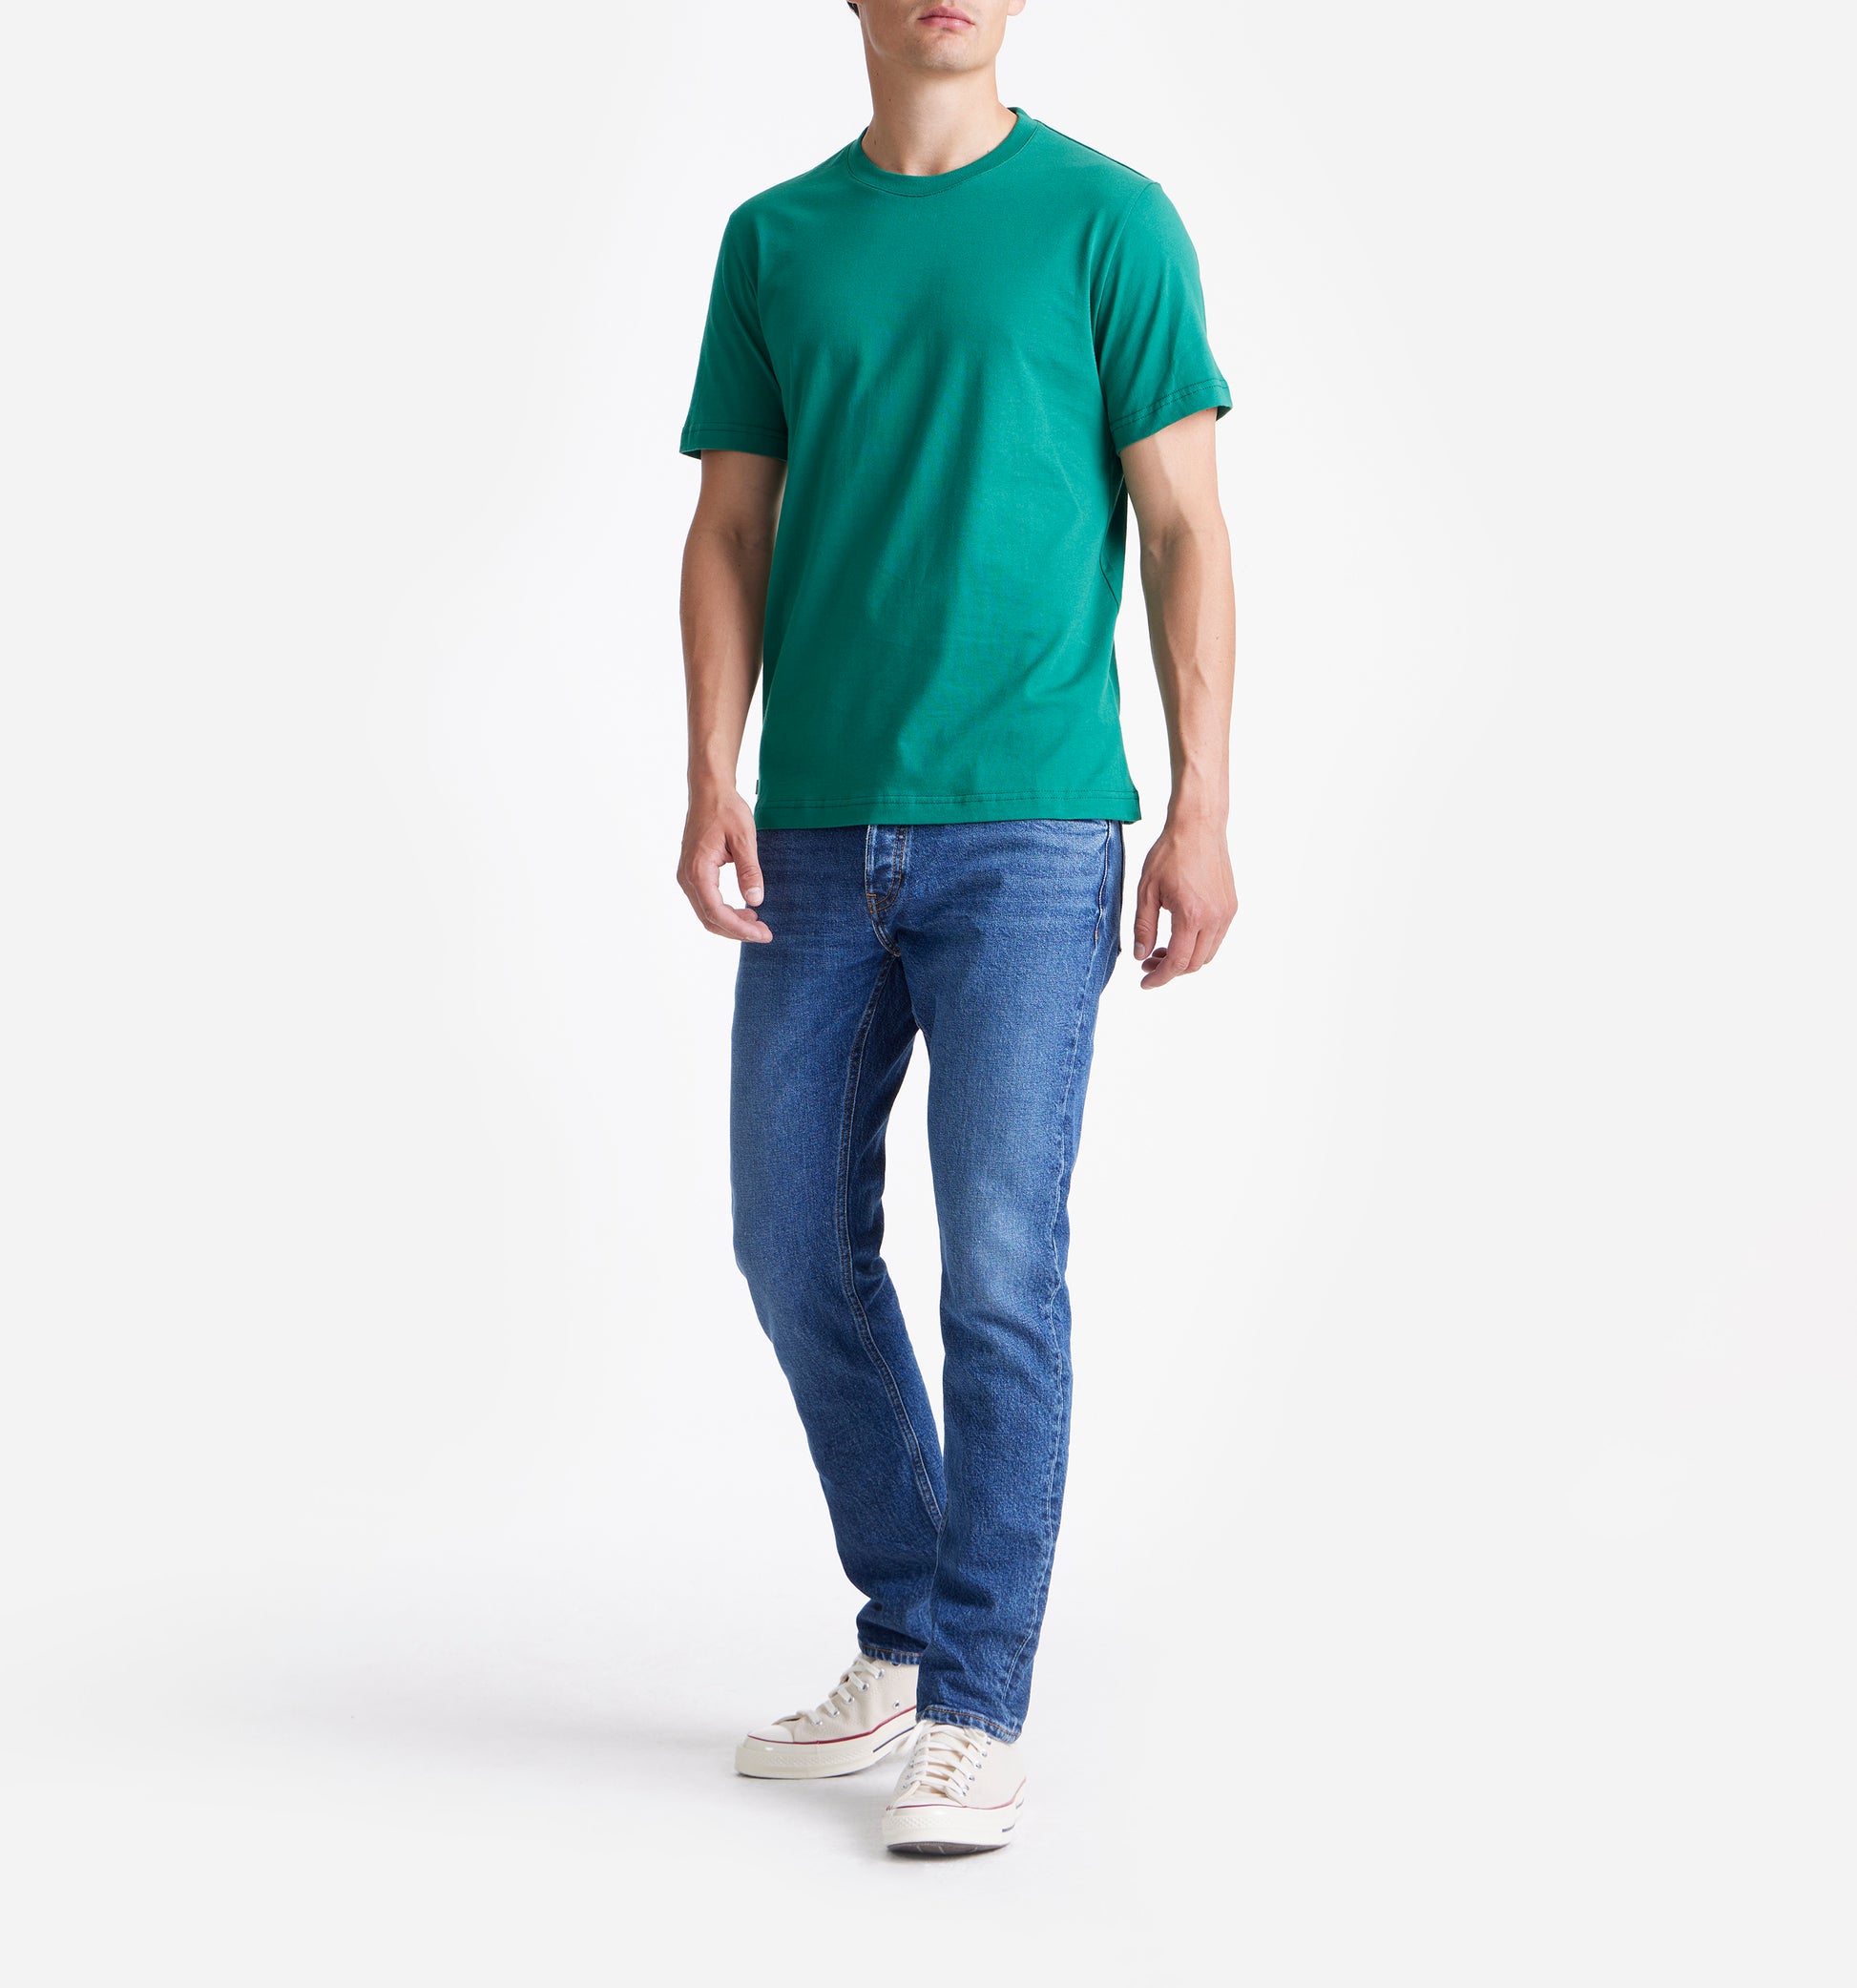 The Steve - Basic Cotton T-shirt In Dark Green From King Essentials